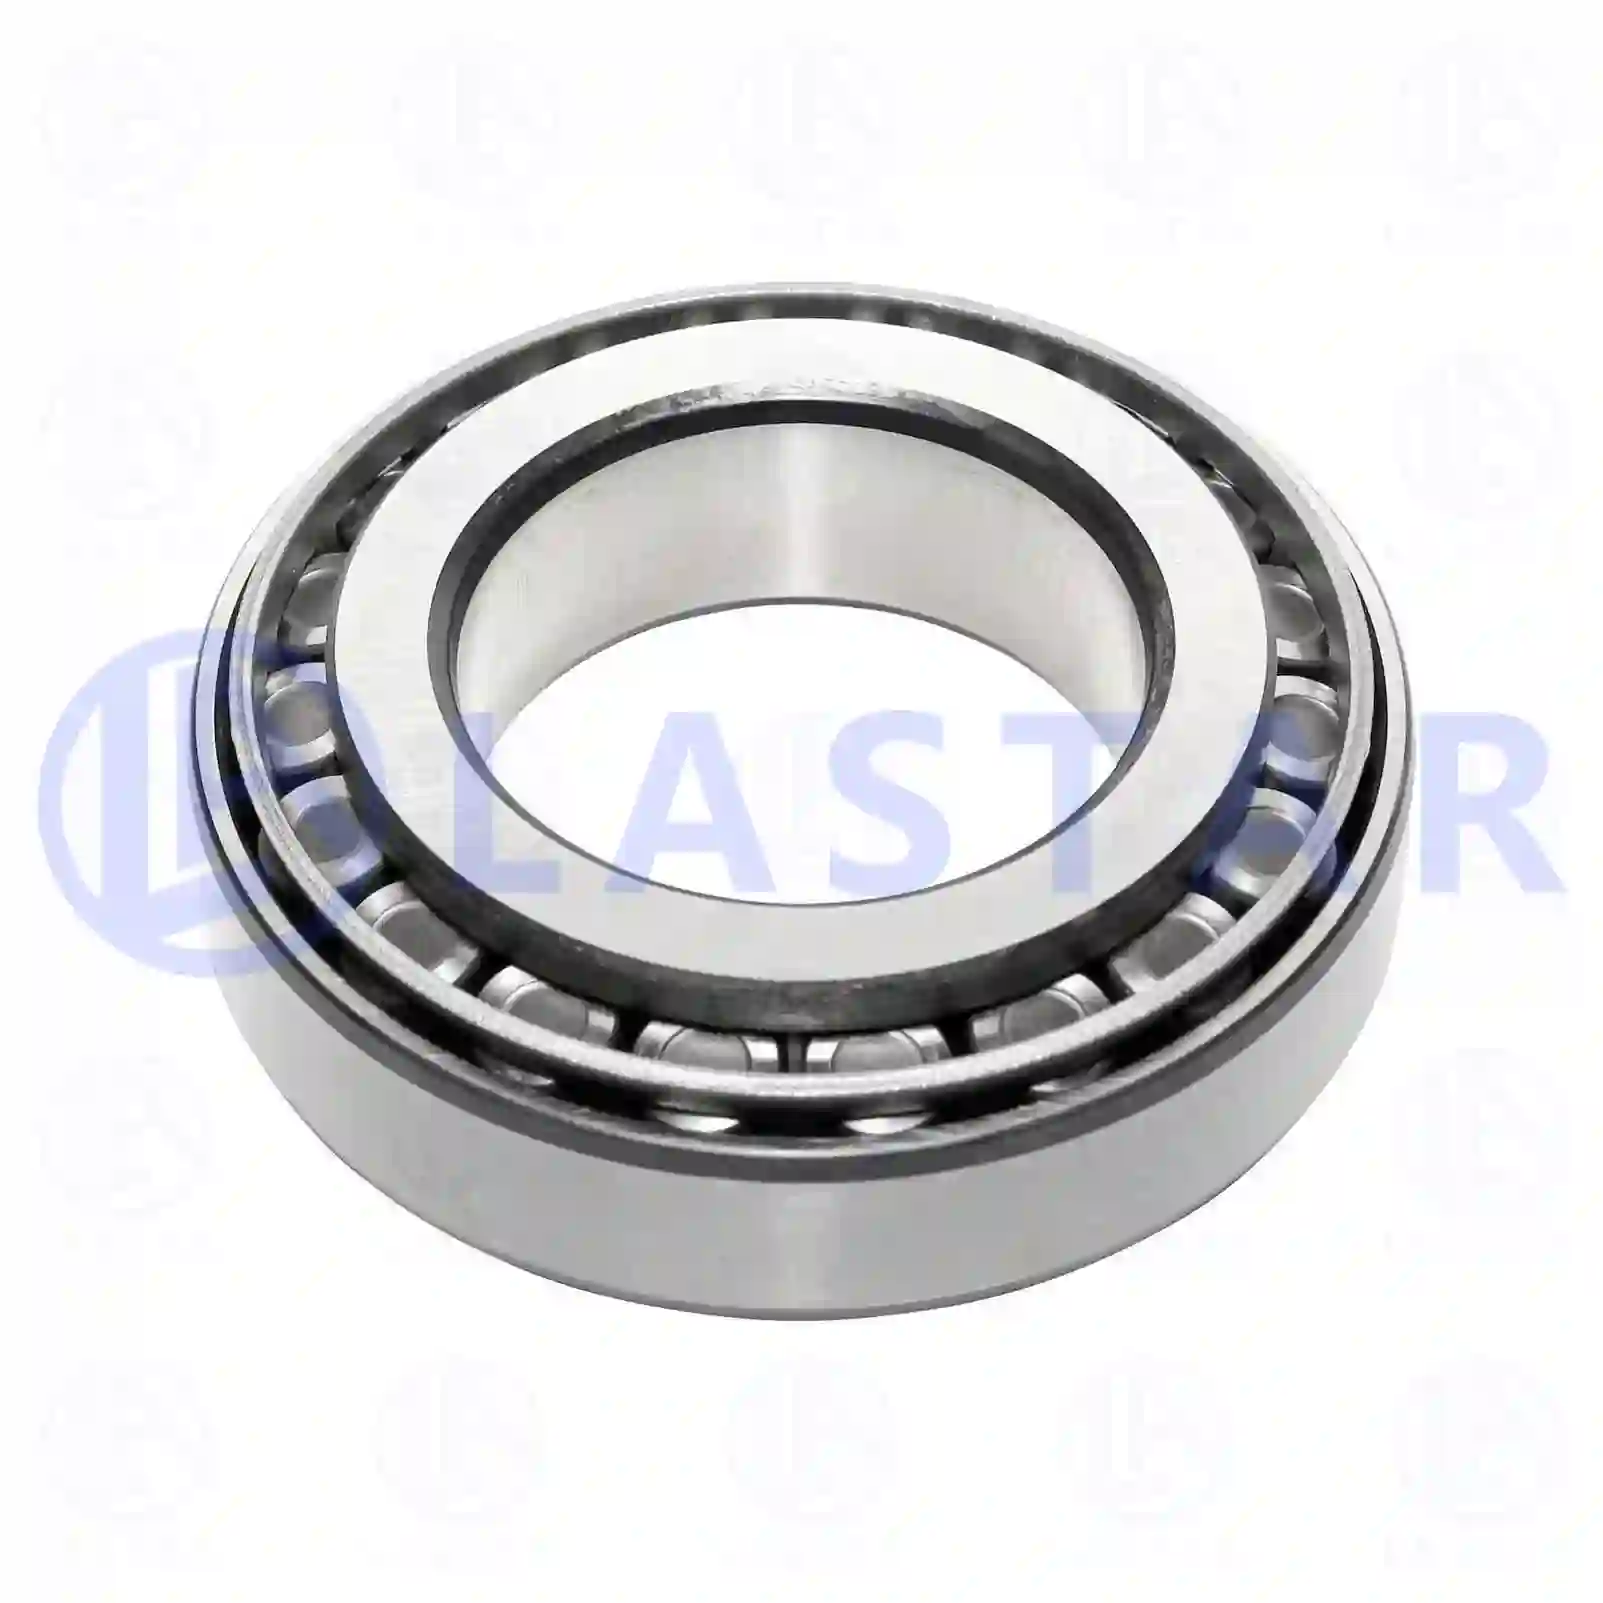 Gearbox Unit Tapered roller bearing, la no: 77732789 ,  oem no:291501319B, 5103547AA, 5103547AB, 5142822AB, 15920, 000237030, 004211974000, OSK251845000, 26800160, 10500496, 710500496, 94032098, 988450110, 988450110A, 988450124, 988450124A, SZ36650011, 8-94248088-0, 8-94248088-1, 8-94248088-2, 8-98171254-0, 9-00093149-0, 01110003, 1110003, 26800160, 00540-27350, 06324900900, 054027350, 996032210, 0007204322, 0009813605, 0019818905, 0029811905, 0029812205, 0059815305, 0079815505, 0159815405, 0159817405, 0179813805, 2651356031, 265135603102, 3199810405, 0023432210, 0959032210, 5000050071, 5000788063, 5000788202, 5516010507, 90368-50001, 11099, 183765, 7011099, 291501319B, 2D0501319A Lastar Spare Part | Truck Spare Parts, Auotomotive Spare Parts